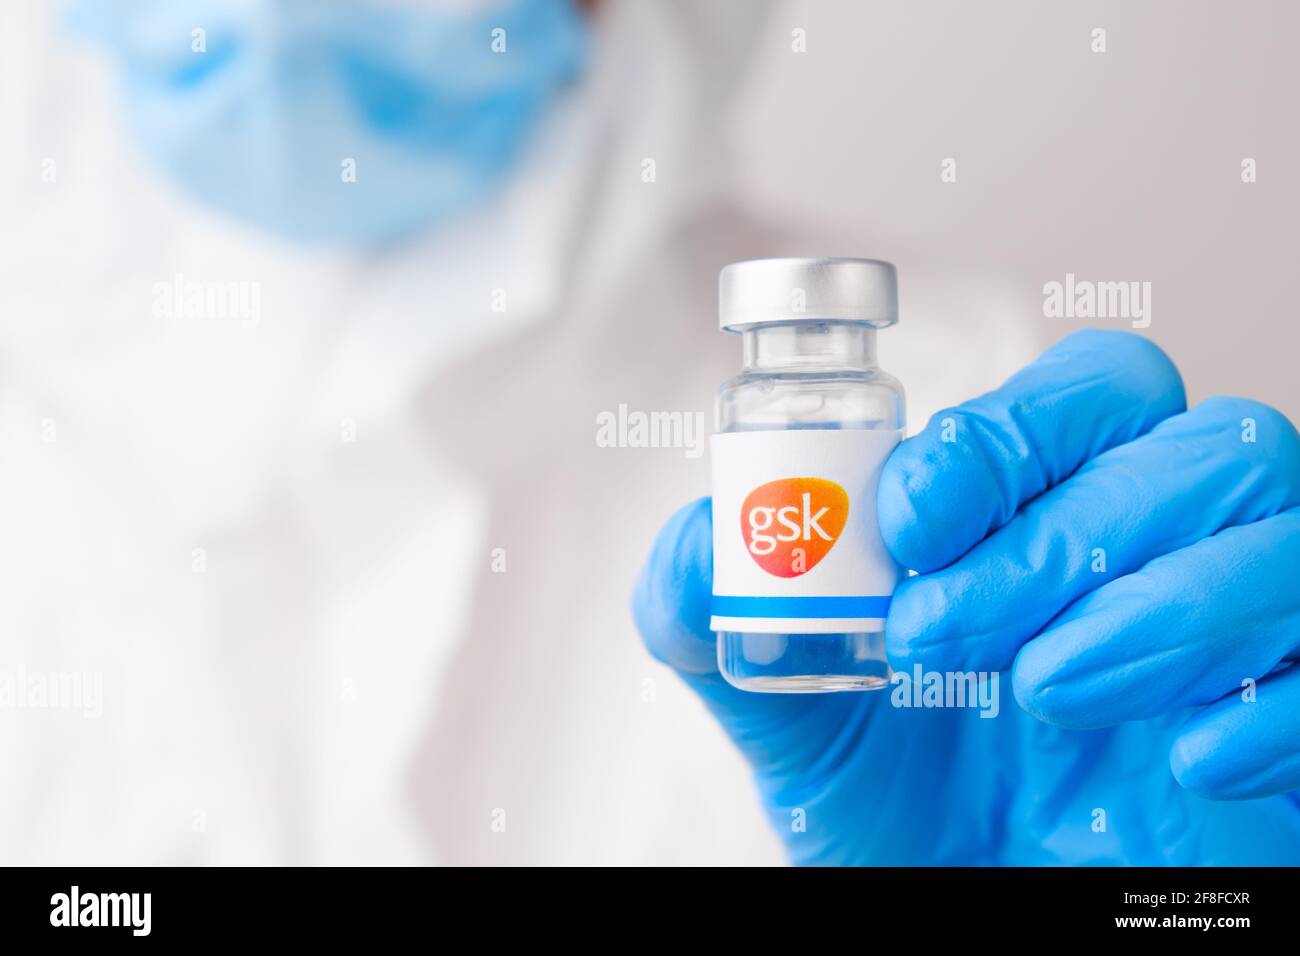 GSK vial or bottle with pharmaceuticals demonstrated by health worker or scientist in rubber gloves, April 2021, San Francisco, USA  Stock Photo